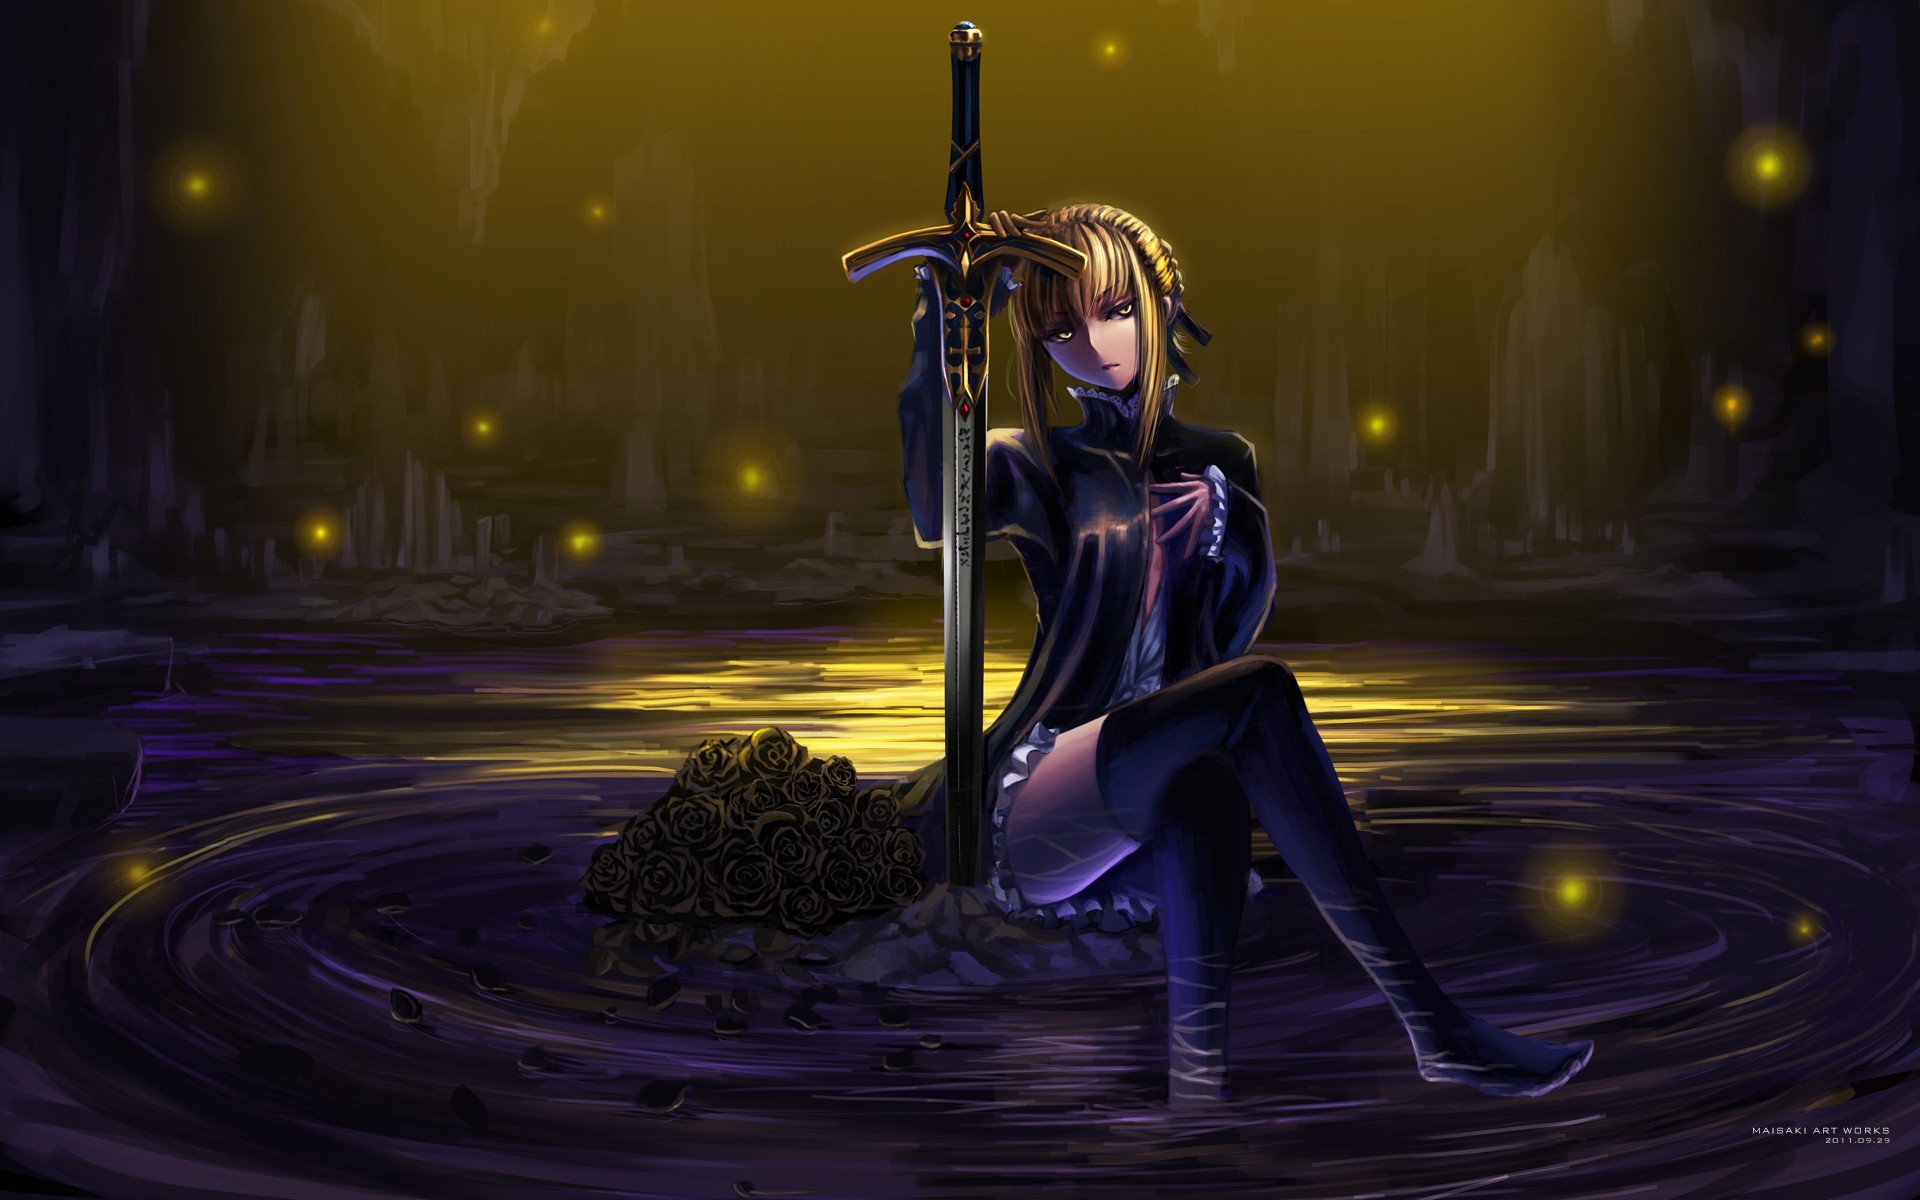 Anime 1920x1200 anime anime girls Fate/Stay Night Saber thigh-highs Fate series fantasy girl fantasy art legs crossed women sword weapon looking at viewer stockings blonde women with swords sitting 2011 (Year) Maisaki Artworks